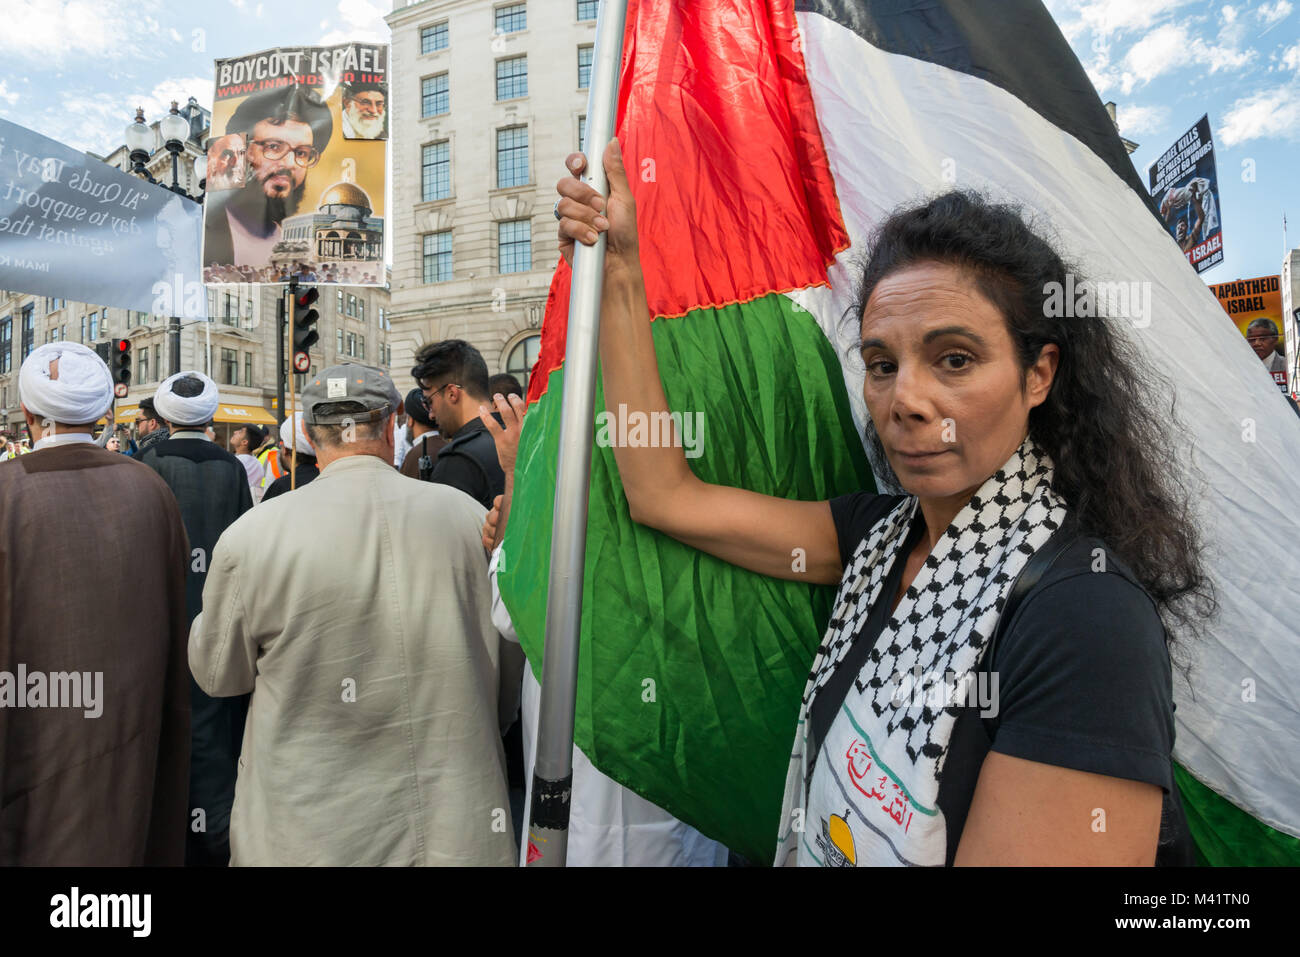 A Palestinian woman carries a large pole with several Palestinian flags on it on tthe Al Quds Day march in London. Stock Photo